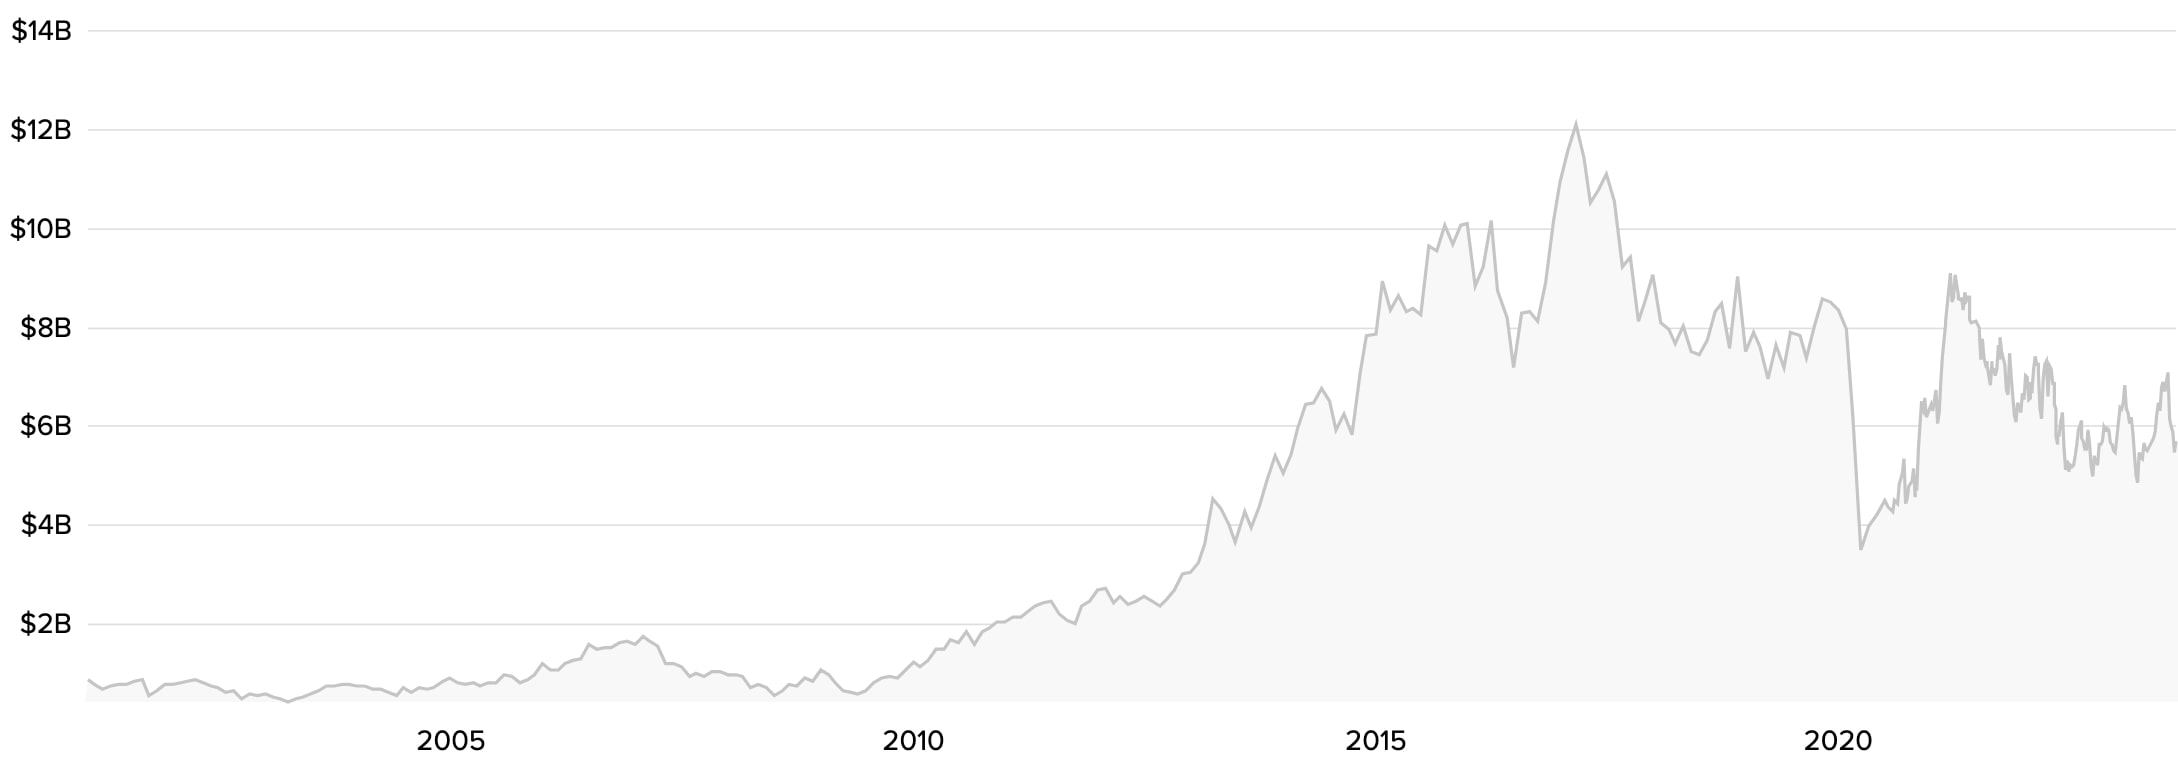 The market capitalization history of Alaska Airlines